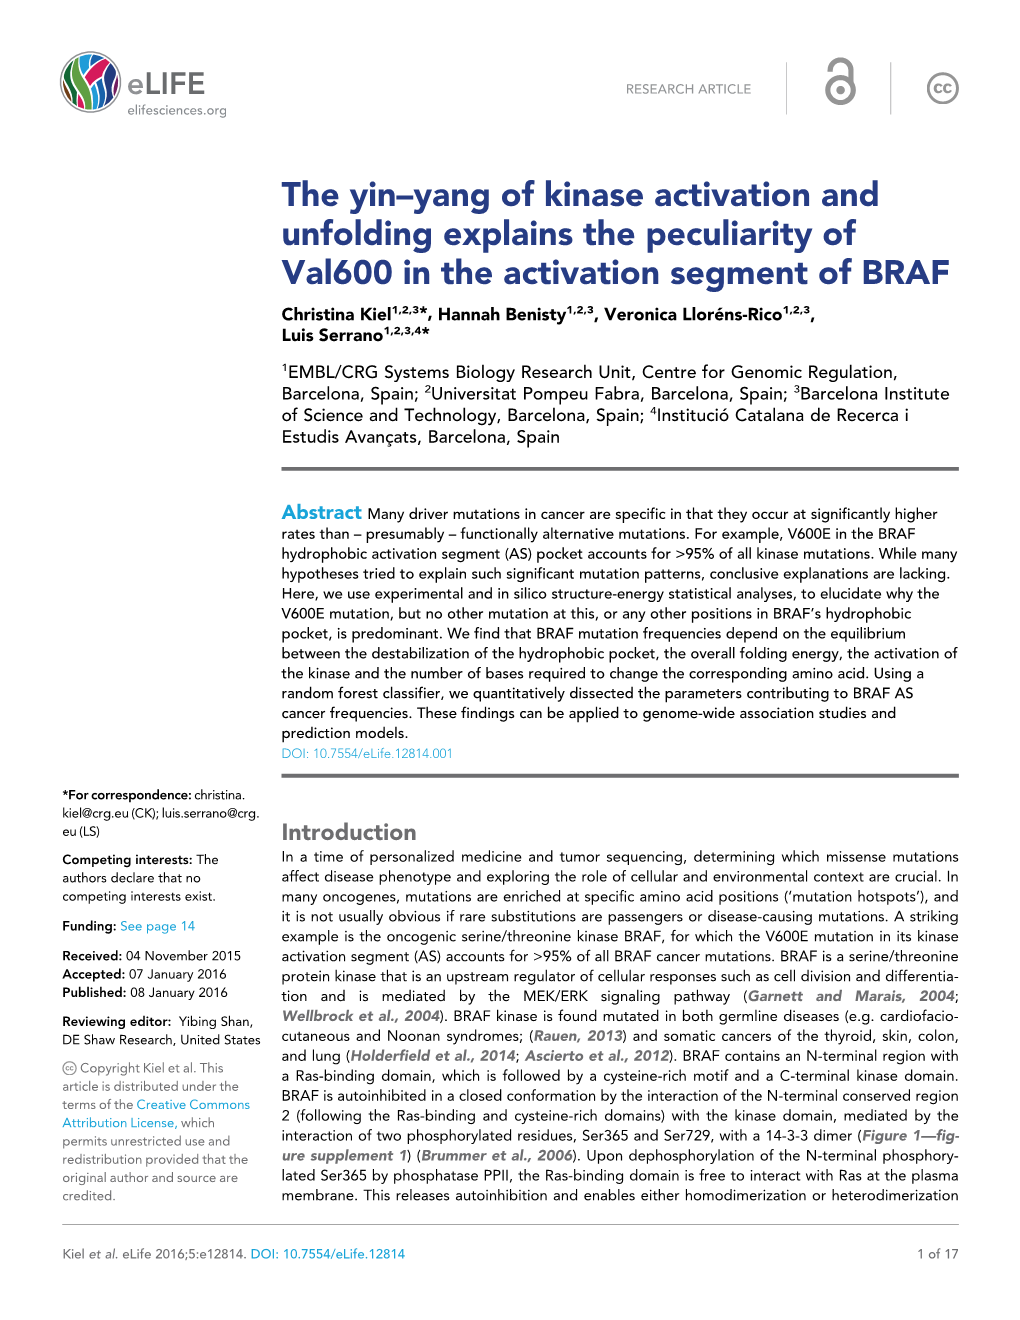 The Yin–Yang of Kinase Activation and Unfolding Explains the Peculiarity Of